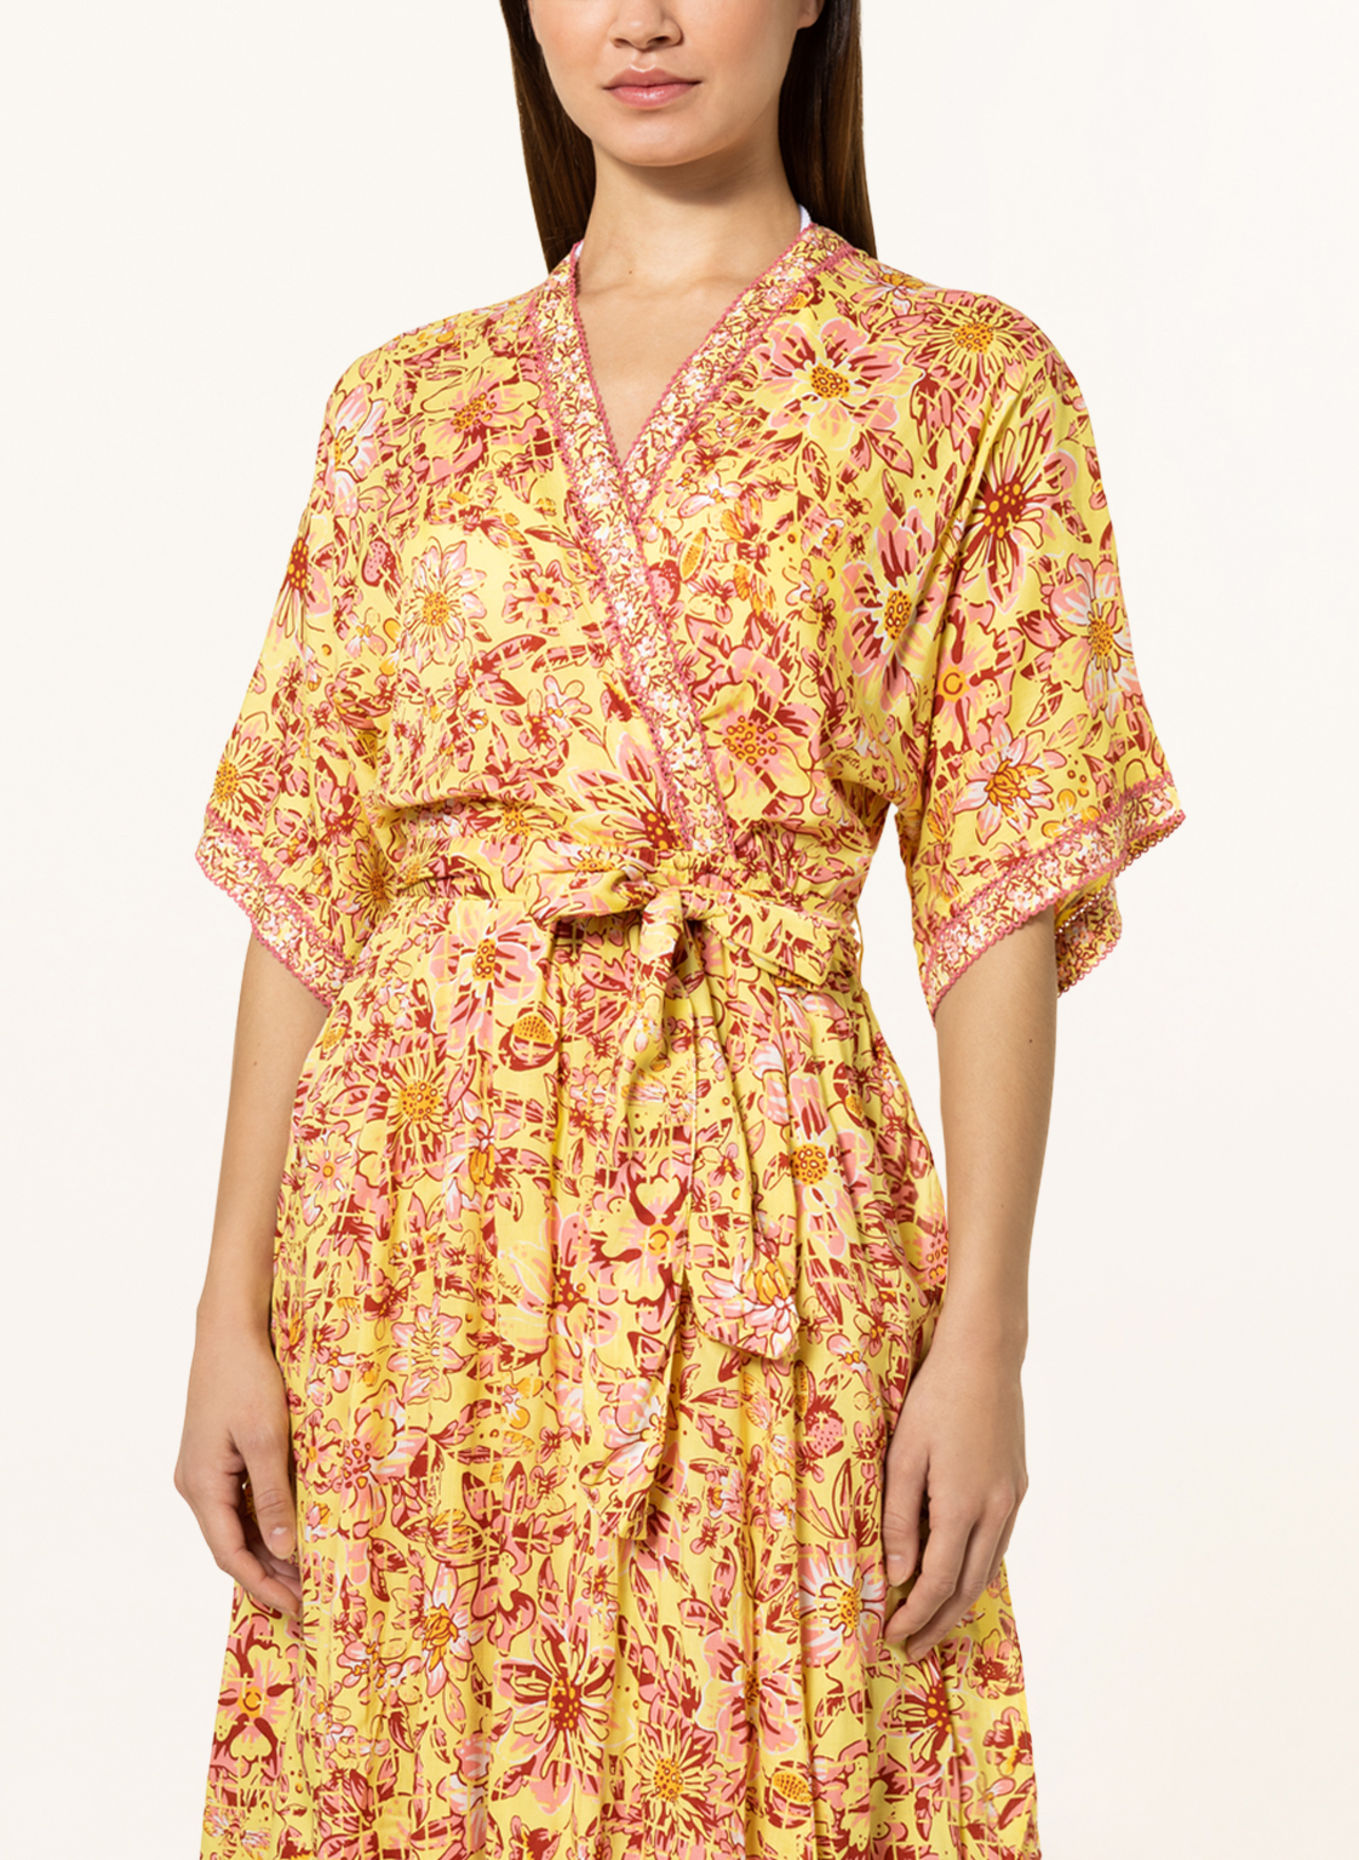 Poupette St Barth Beach dress ADHA in wrap look with 3/4 sleeves, Color: YELLOW/ DARK RED/ LIGHT RED (Image 4)